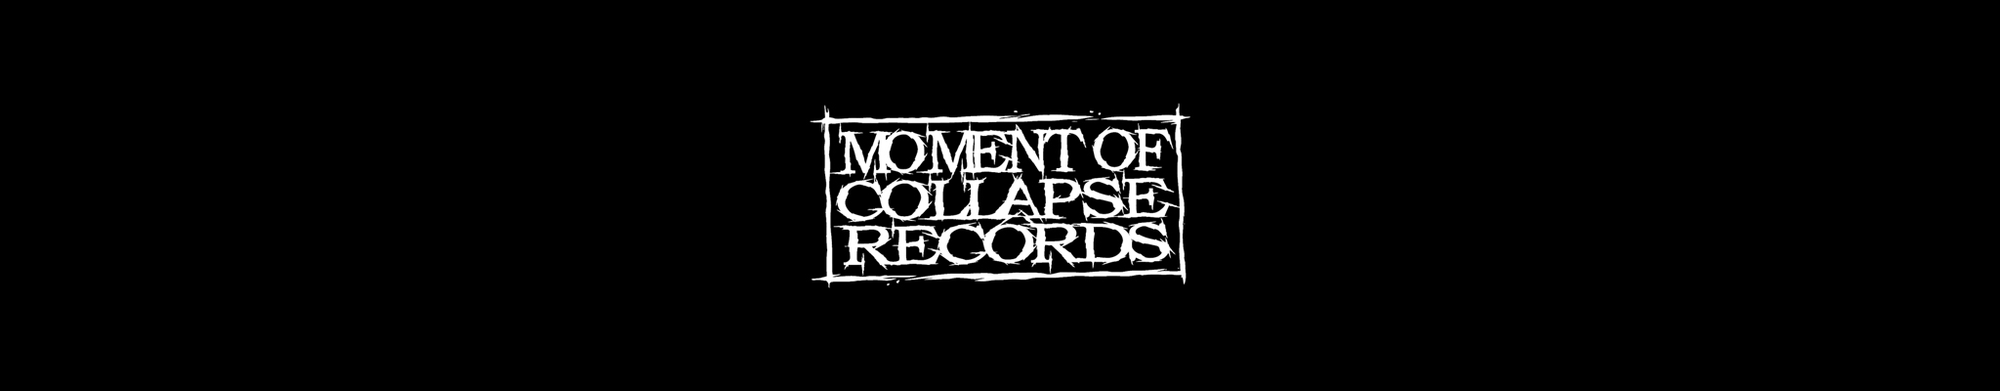 MOMENT OF COLLAPSE RECORDS